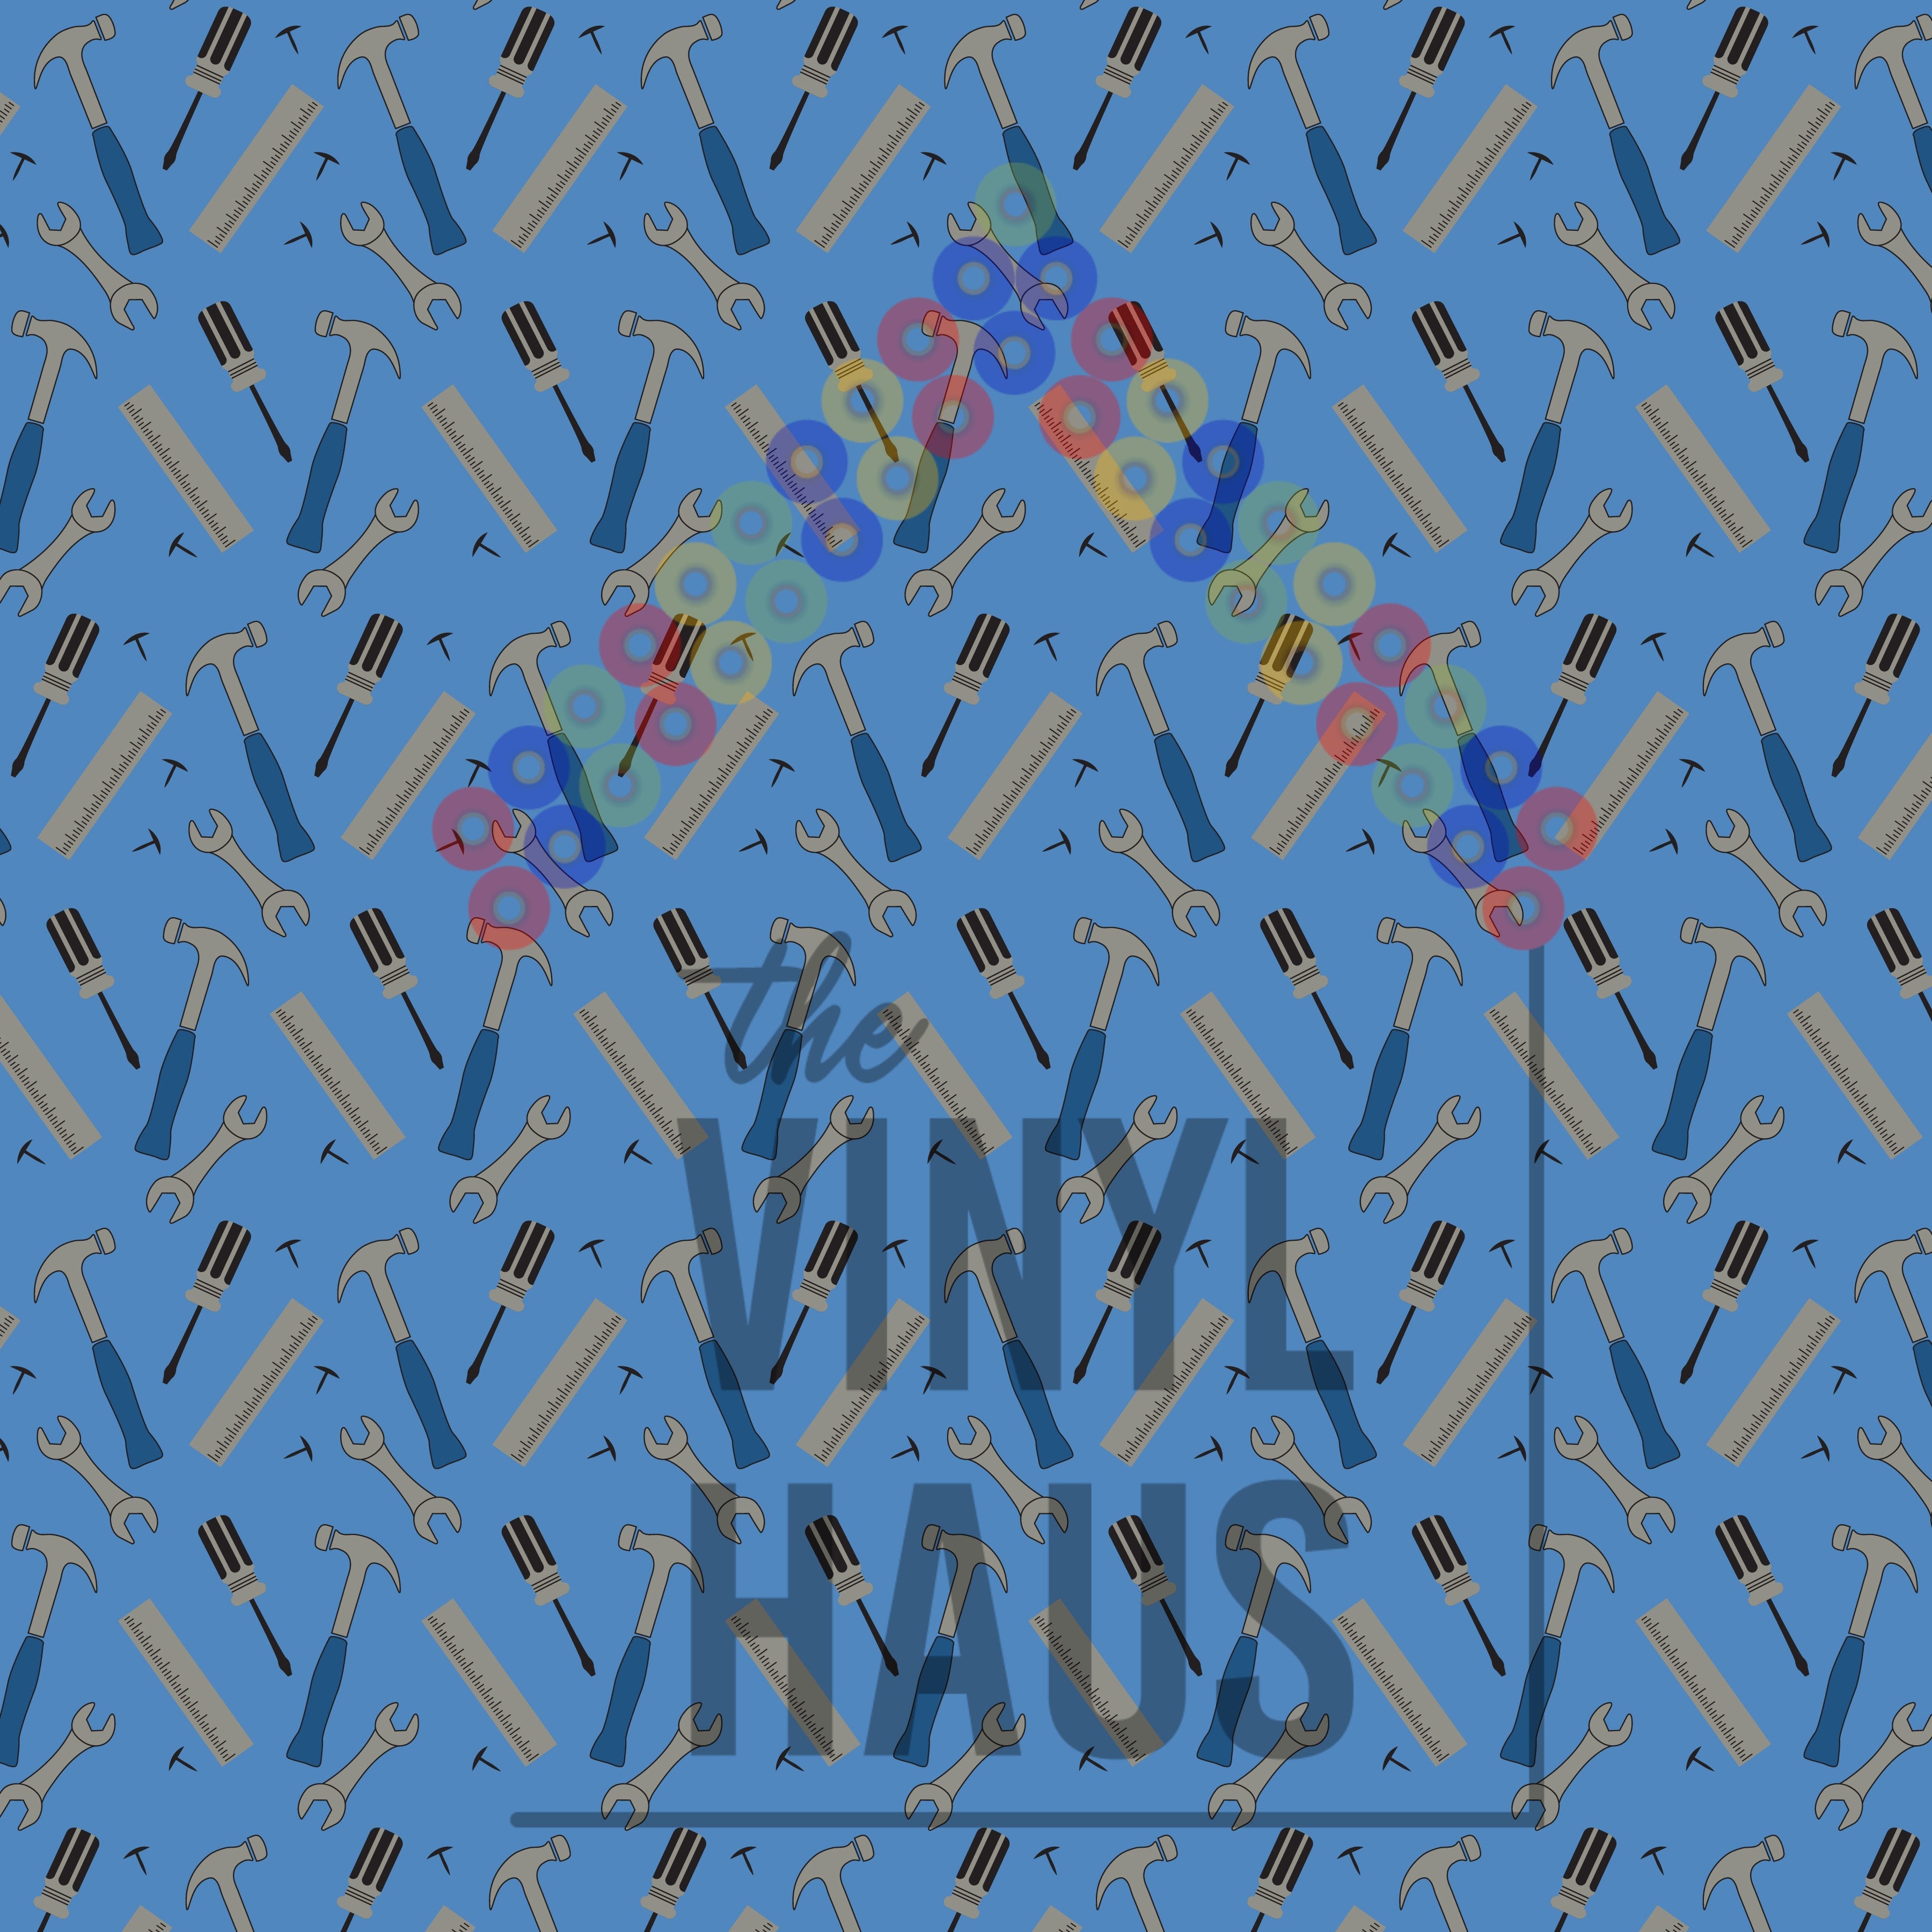 Father's Day Tools Pattern Vinyl 12" x 12" - The Vinyl Haus